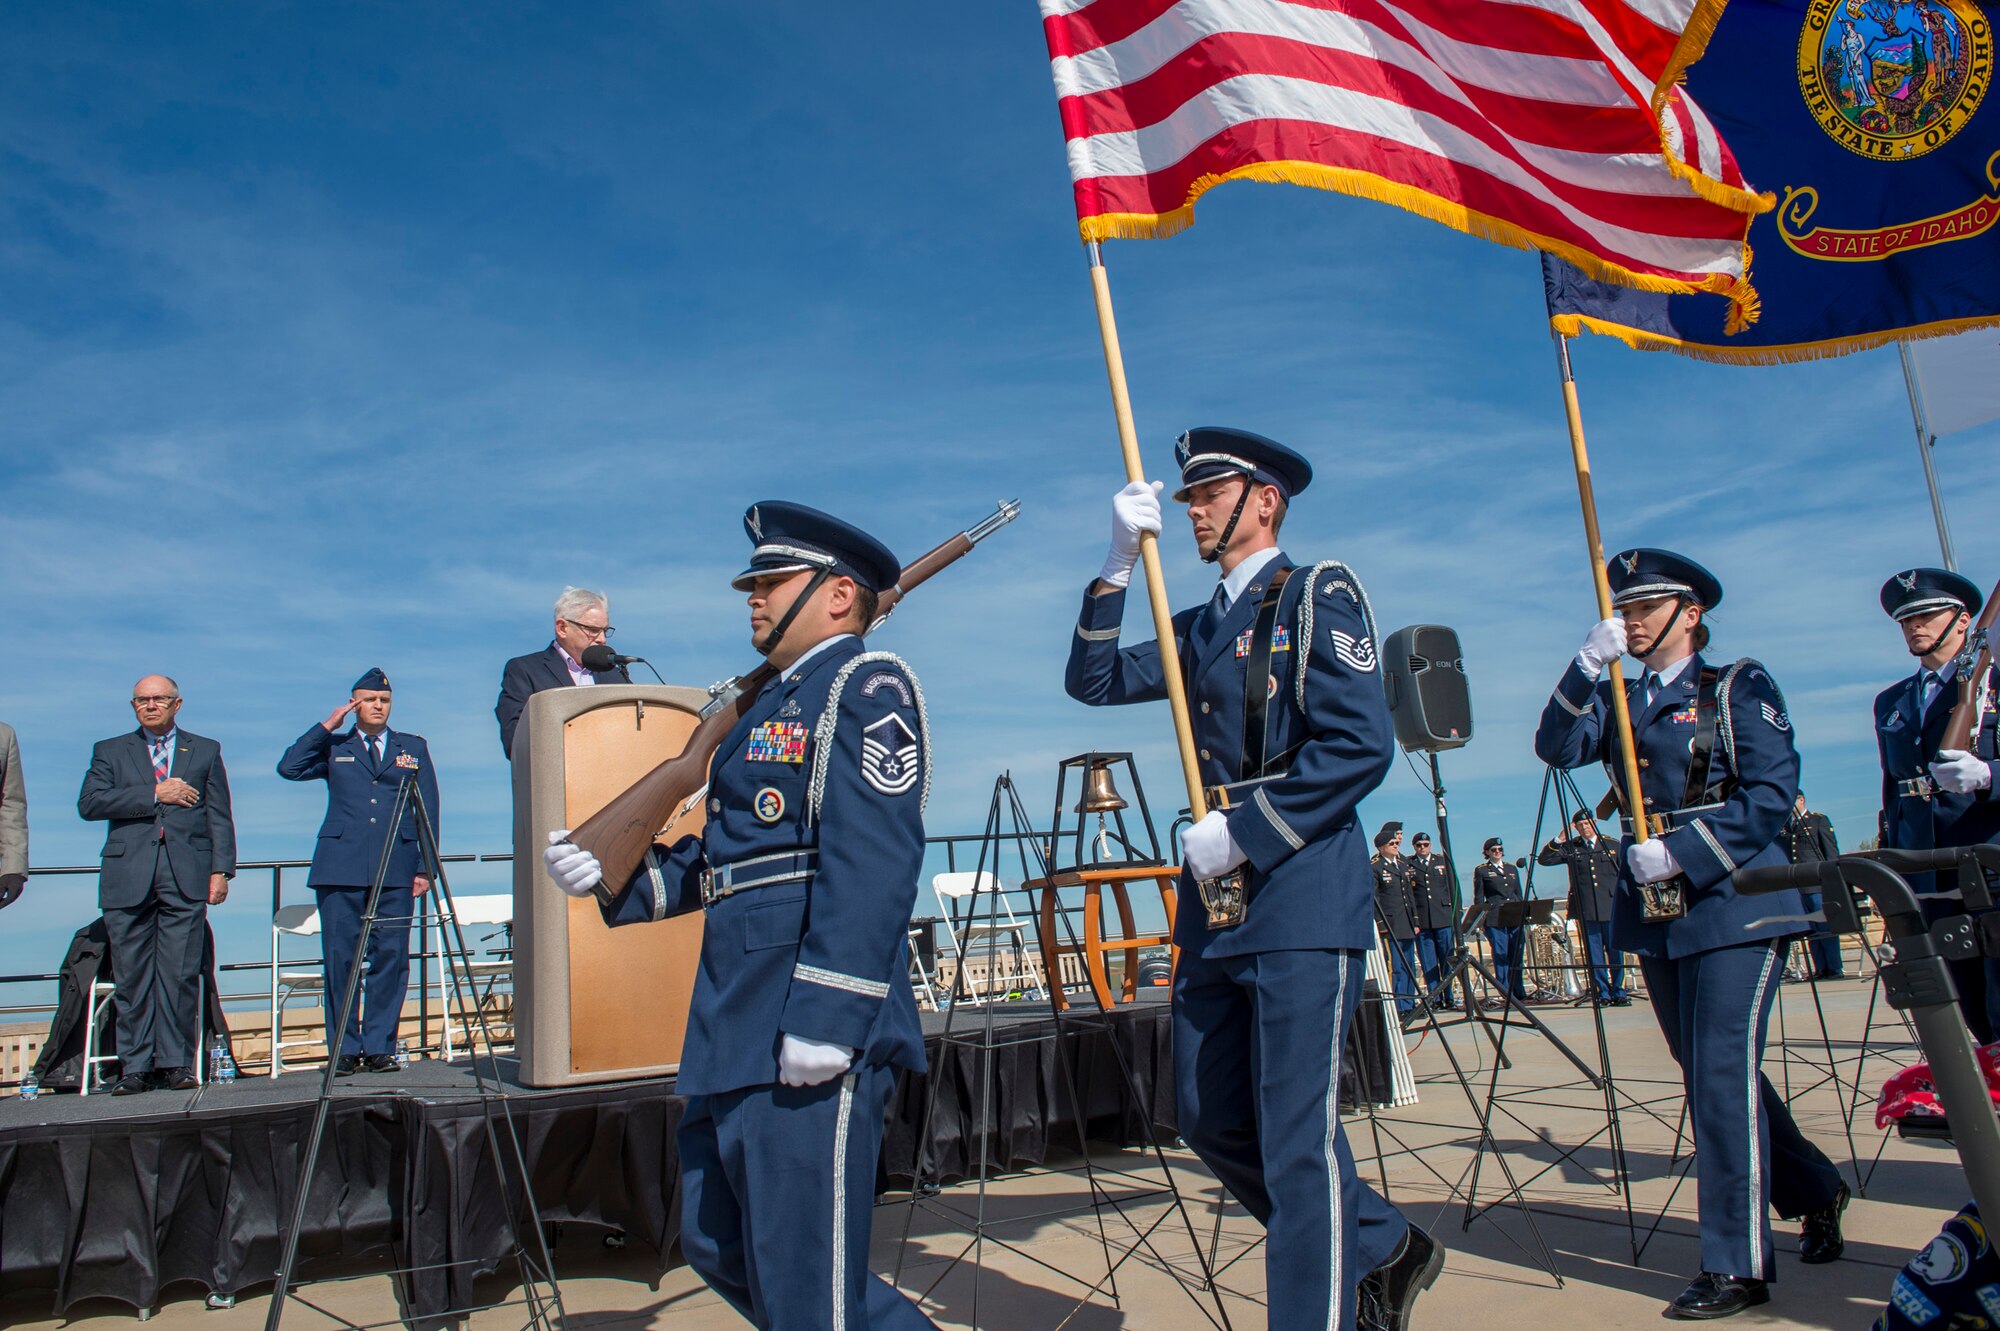 Members of the 124th Fighter Wing Honor Guard present colors to open the Memorial Day Ceremony at Idaho State Veterans Cemetery, Boise, Idaho, May 27, 2019. The ceremony was held to honor and remember all those who died serving in defense of our Nation, as well as those who served and those who are still serving in the armed forces. (U.S. Air National Guard photo by Ryan White)